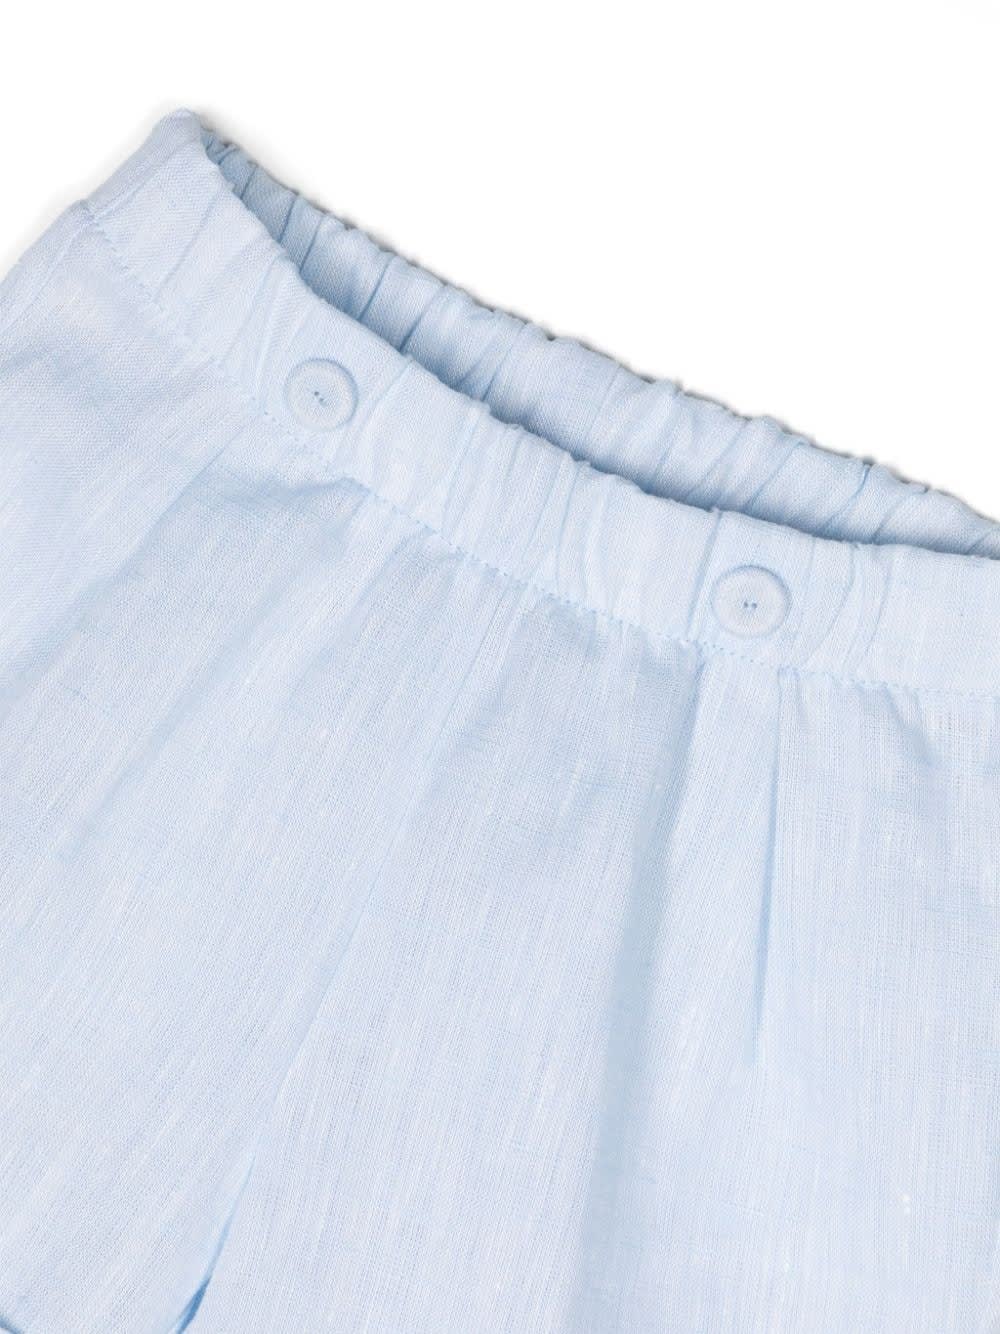 Shop Il Gufo Two Piece Linen Set In White And Light Blue In Cielo